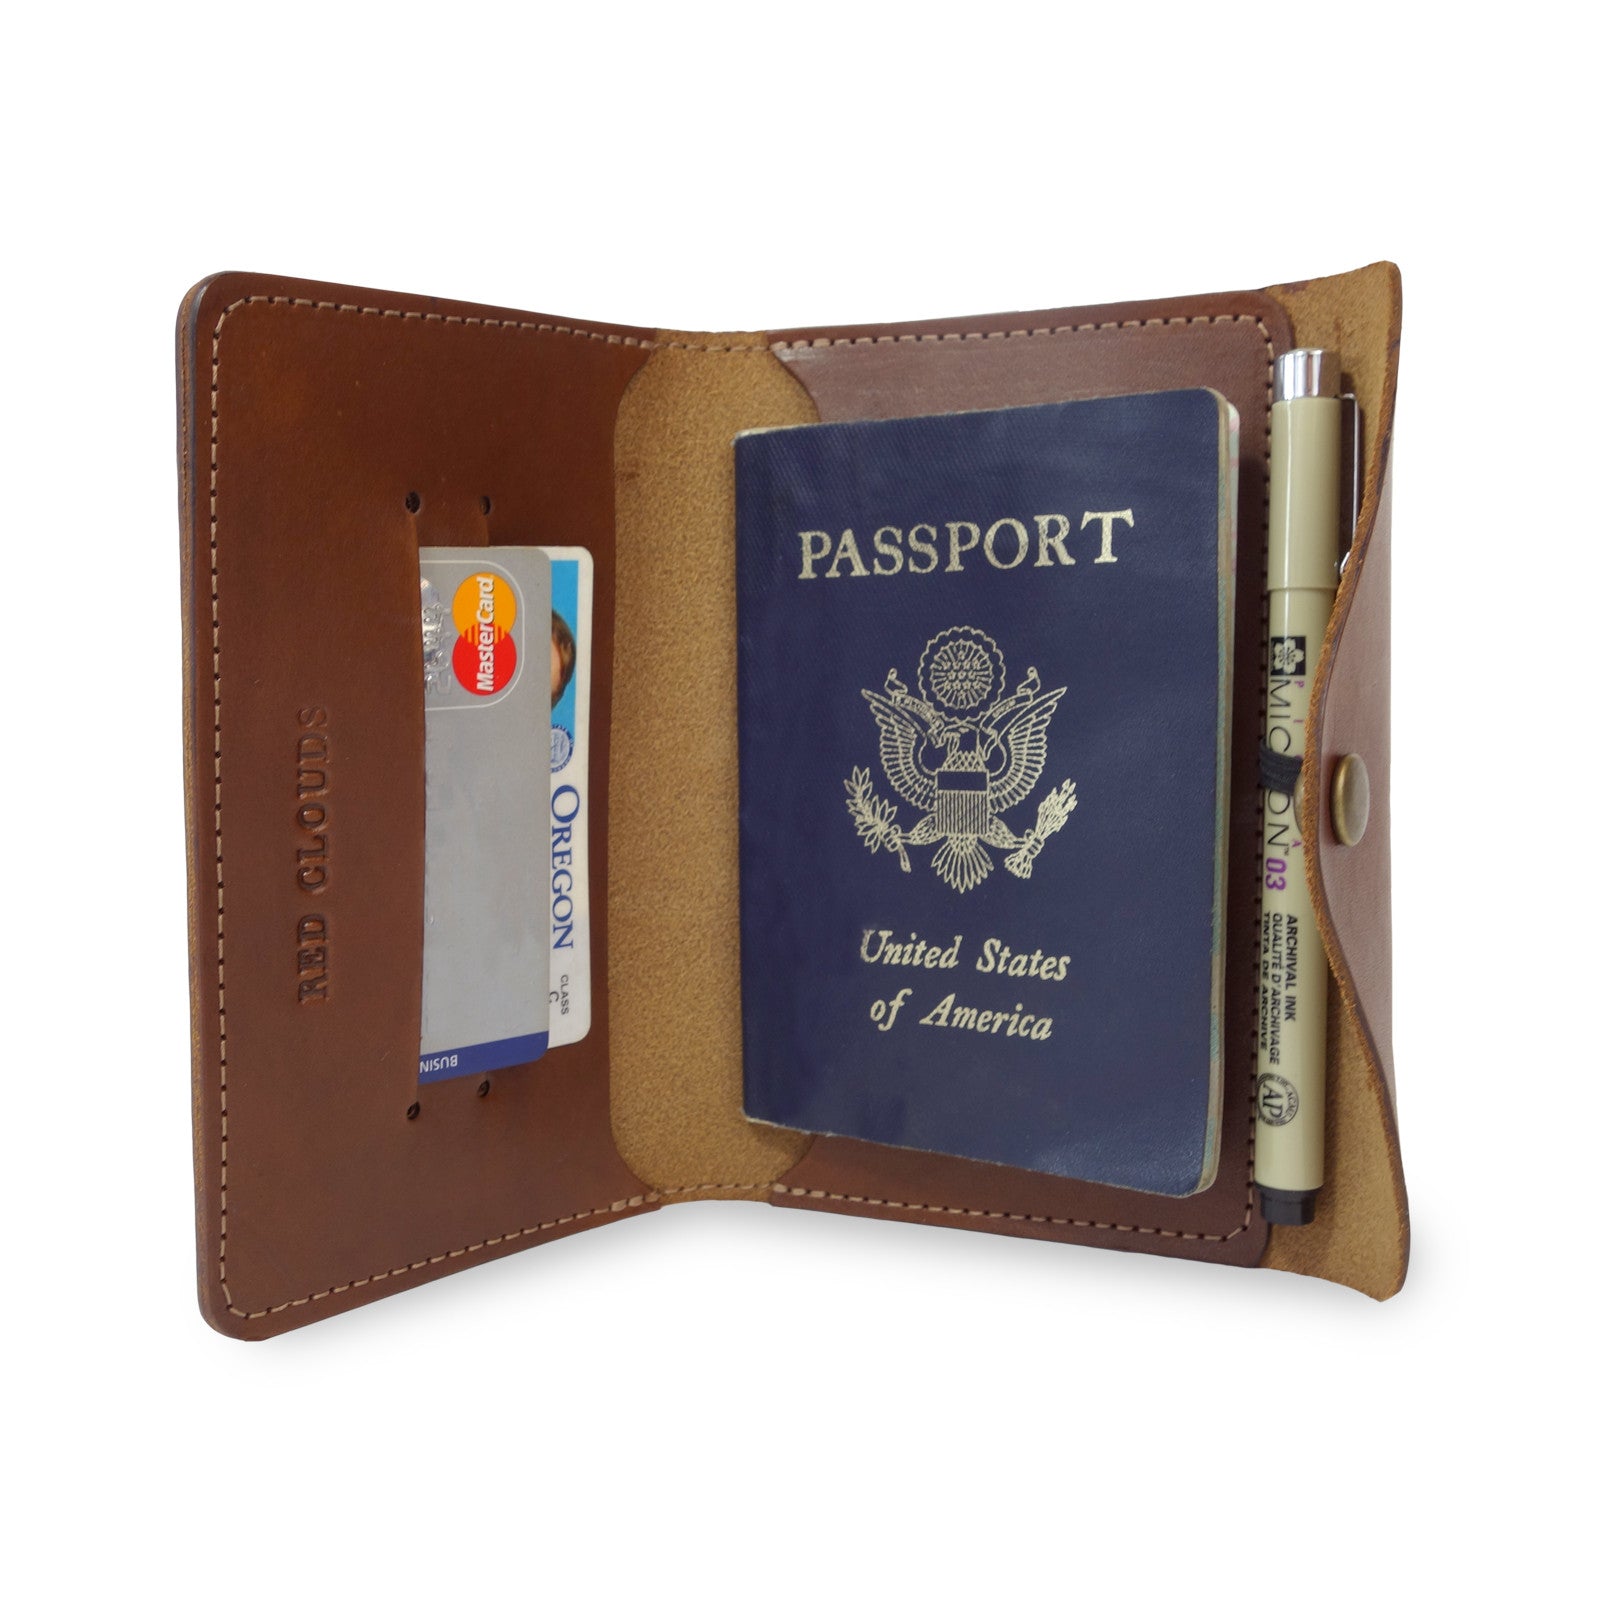 Passport wallet, leather wallet, notebook wallet, travel wallet, leather passport carrier, This product was brought to life for people who use their passport or sketchbook as a wallet. We ask that you value your belongings by placing them in the care this handcrafted passport/sketchbook wallet.